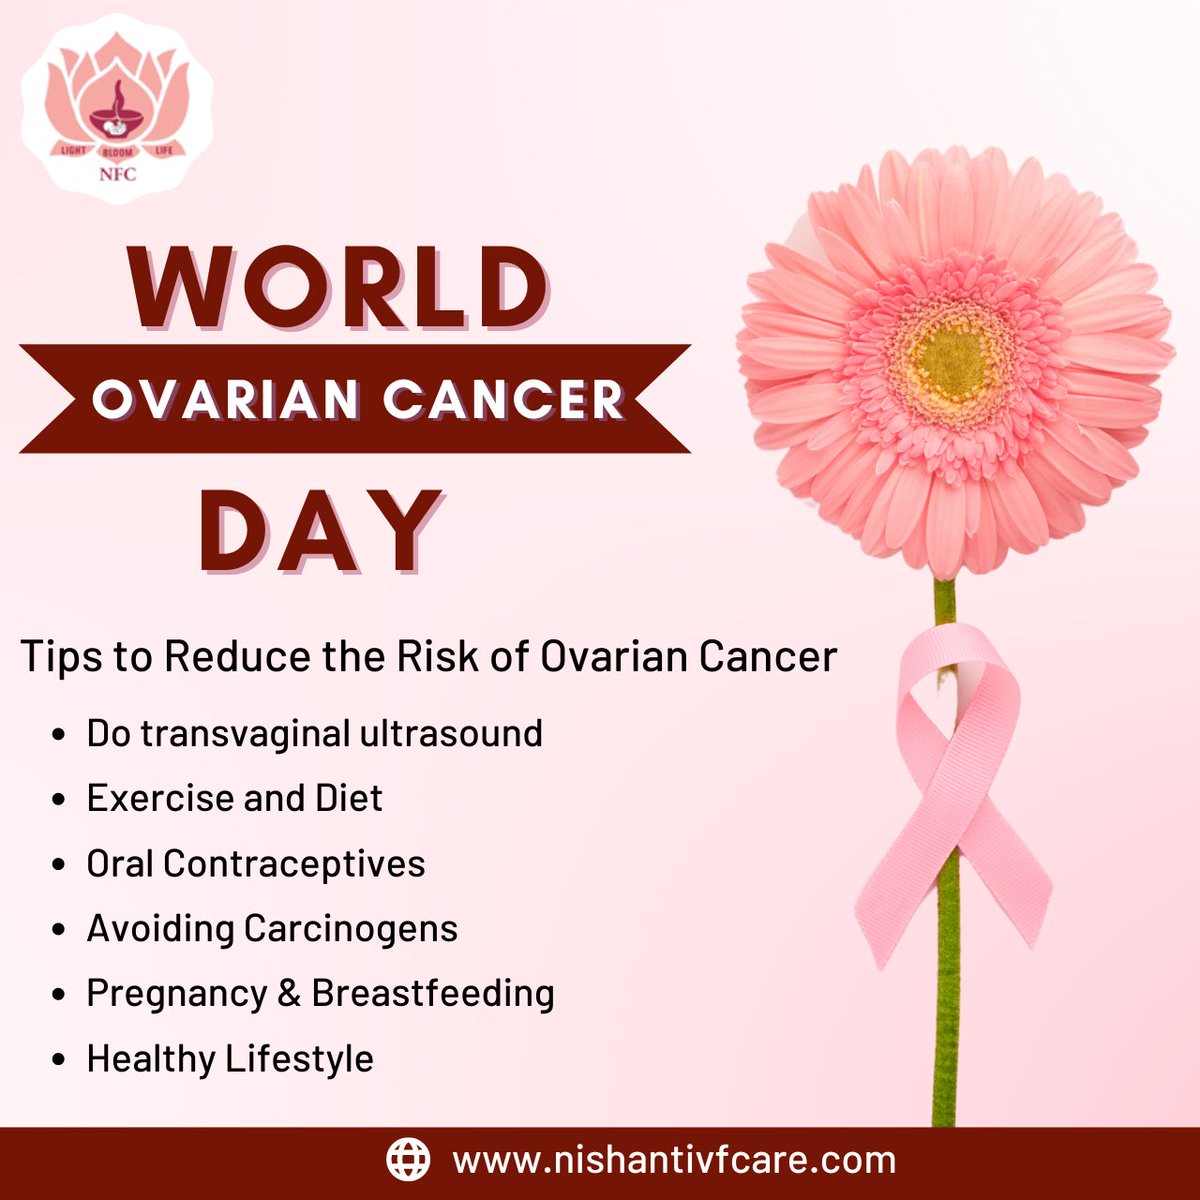 Take proactive steps like transvaginal ultrasound, exercise, diet, oral contraceptives, avoiding carcinogens, and embracing a healthy lifestyle. #WorldOvarianCancerDay

#CancerAwareness #OvarianCancerDay #OvarianCancerDay2024 #CancerPrevention #WomenHealth #FightAgainstCancer